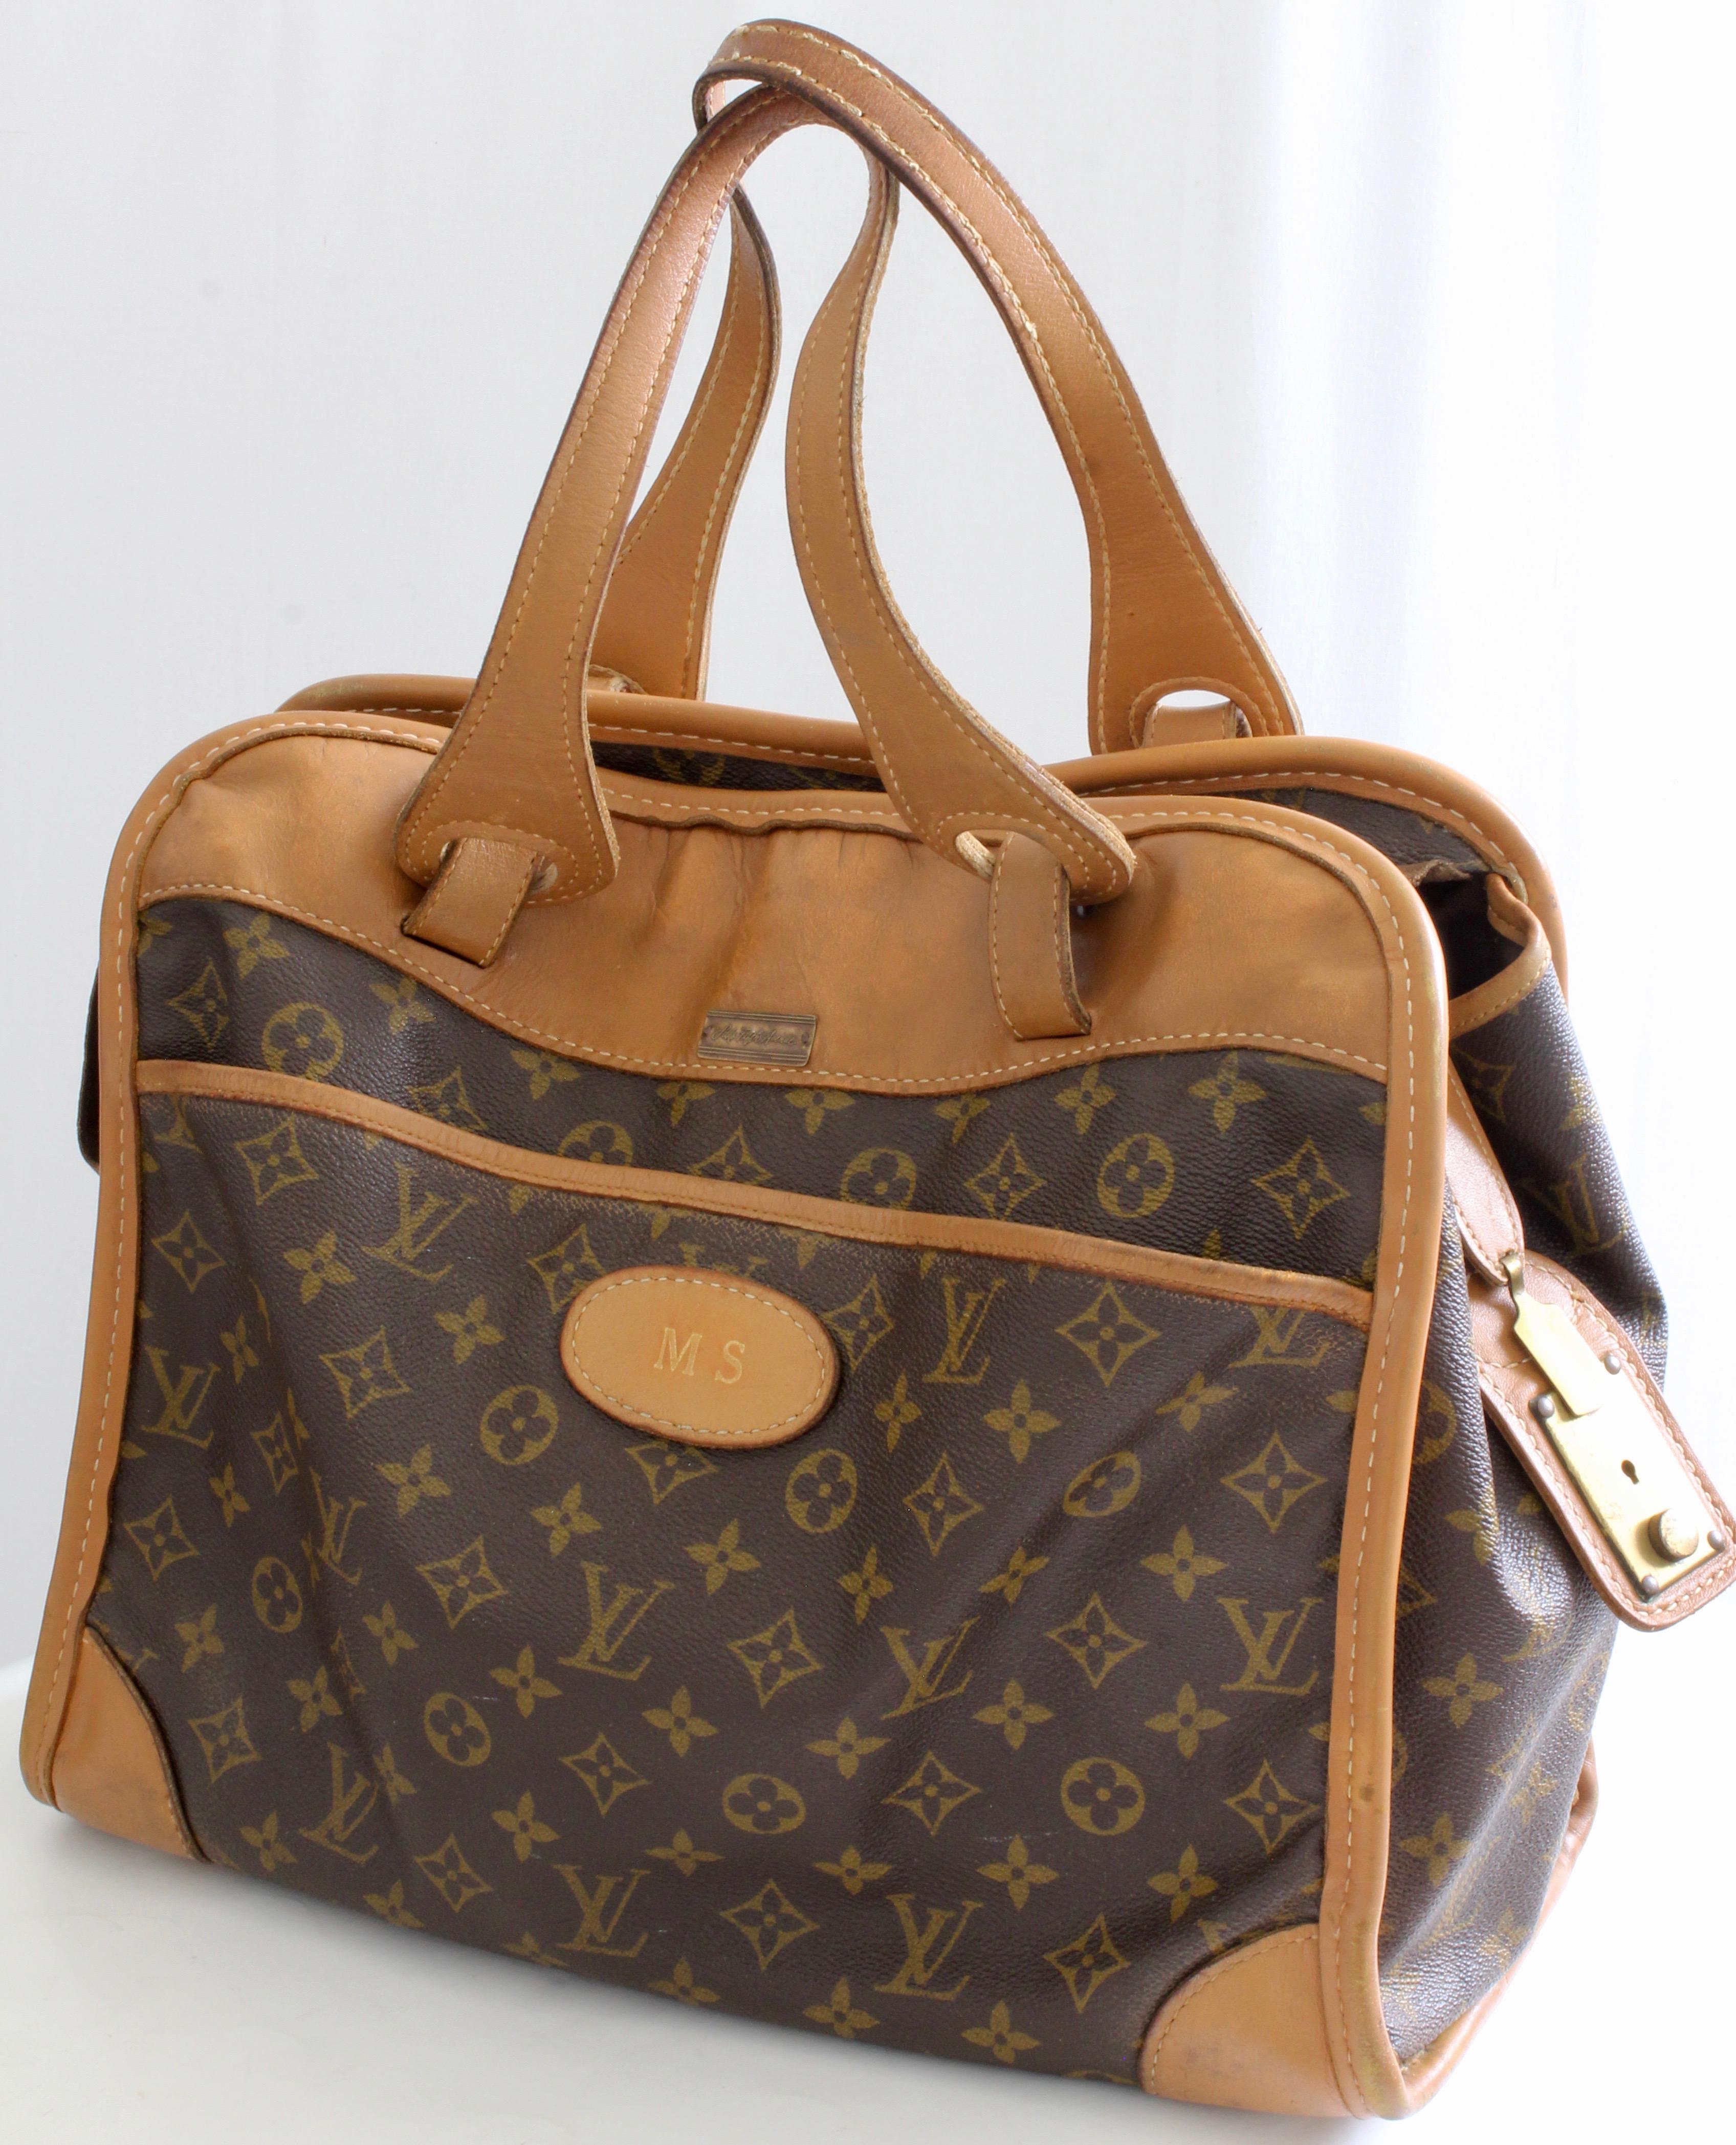 Women's or Men's Louis Vuitton Carry On Bag Travel Tote Monogram Canvas & Leather French Co 1970s